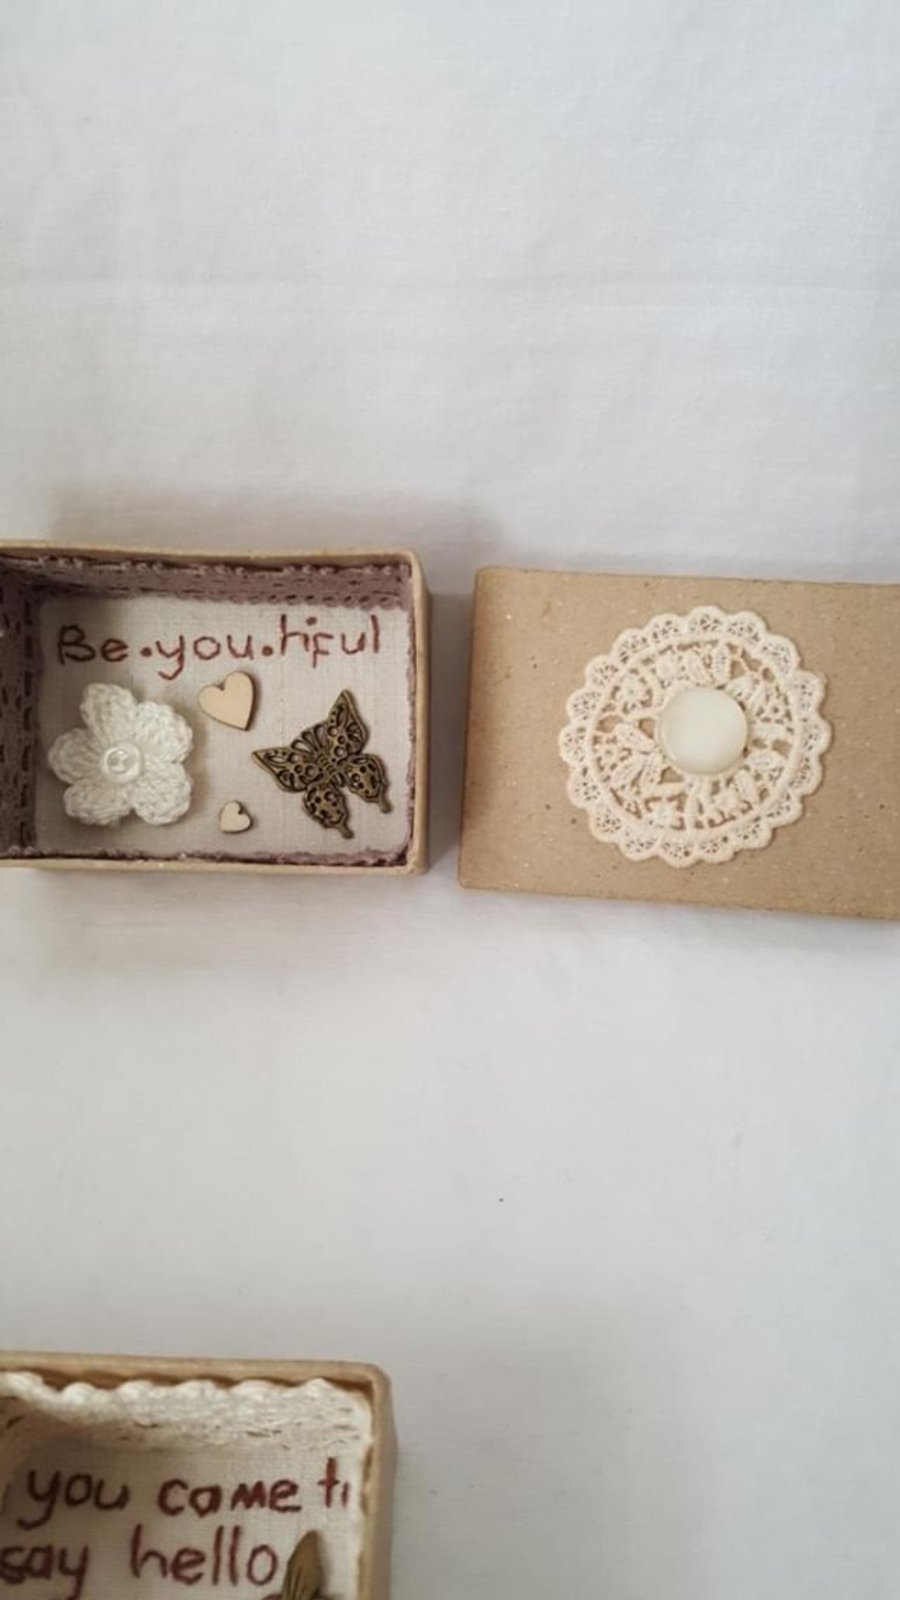 small miniature art diorama with a message 'be-you-tiful'